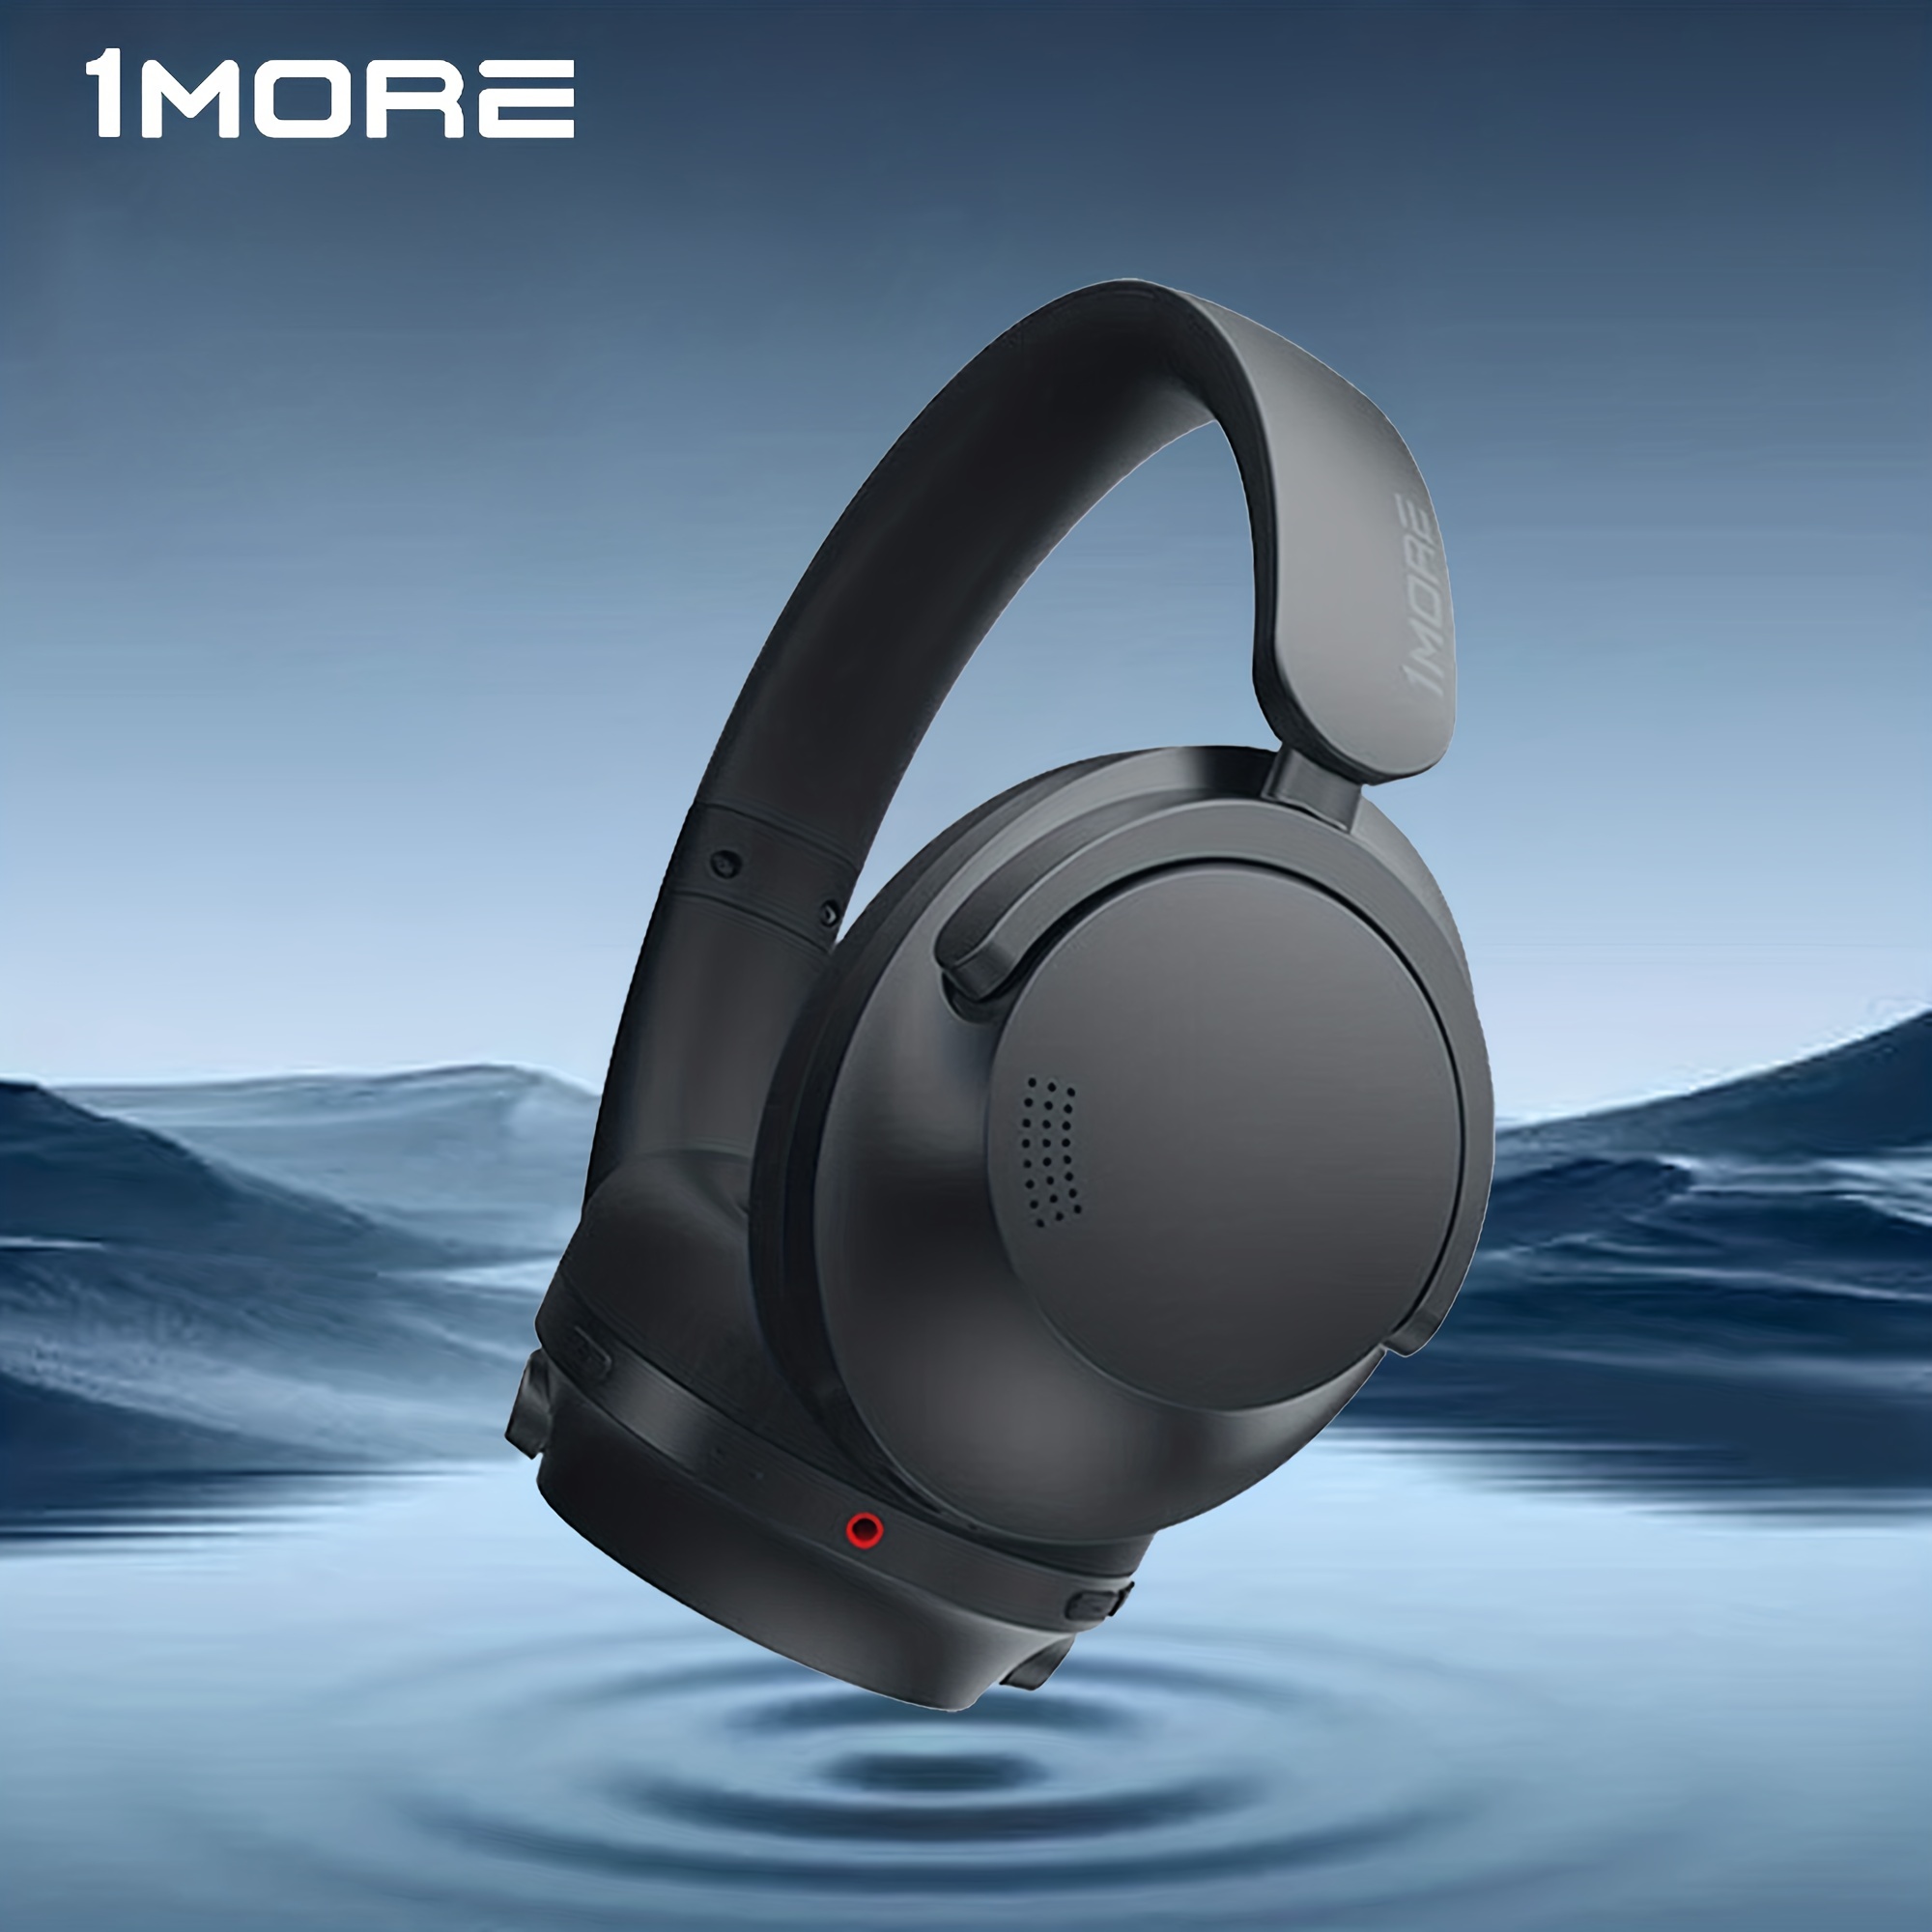 1MORE's SonoFlow Headphone Offers Remarkable Sound and Endless